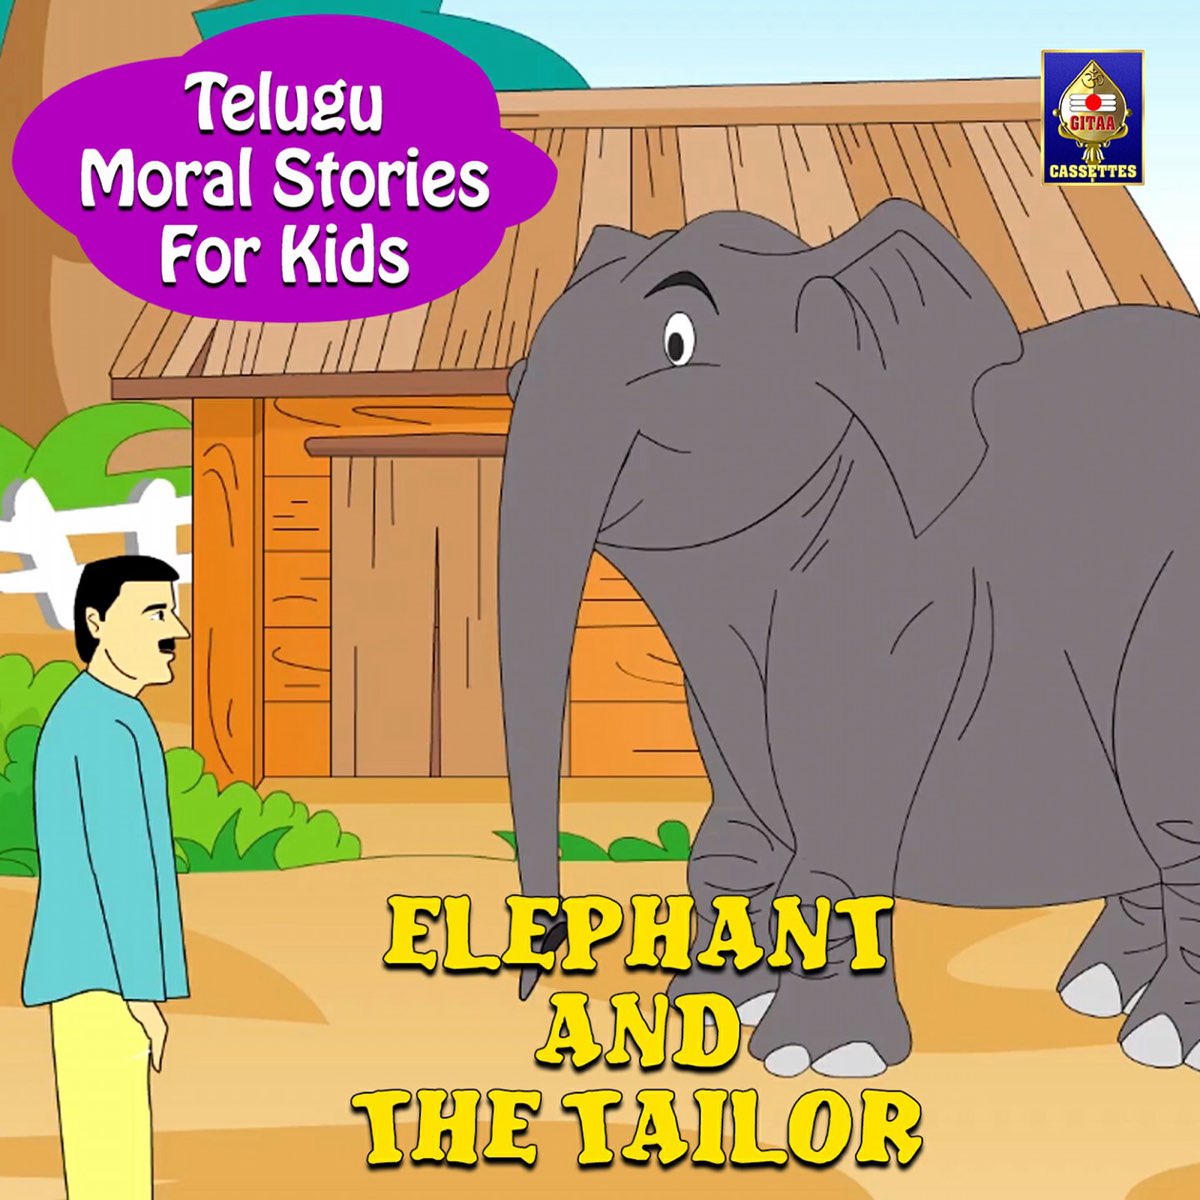 Telugu Moral Stories For Kids - Elephant and the Tailor - Single by Sandeep  on Apple Music